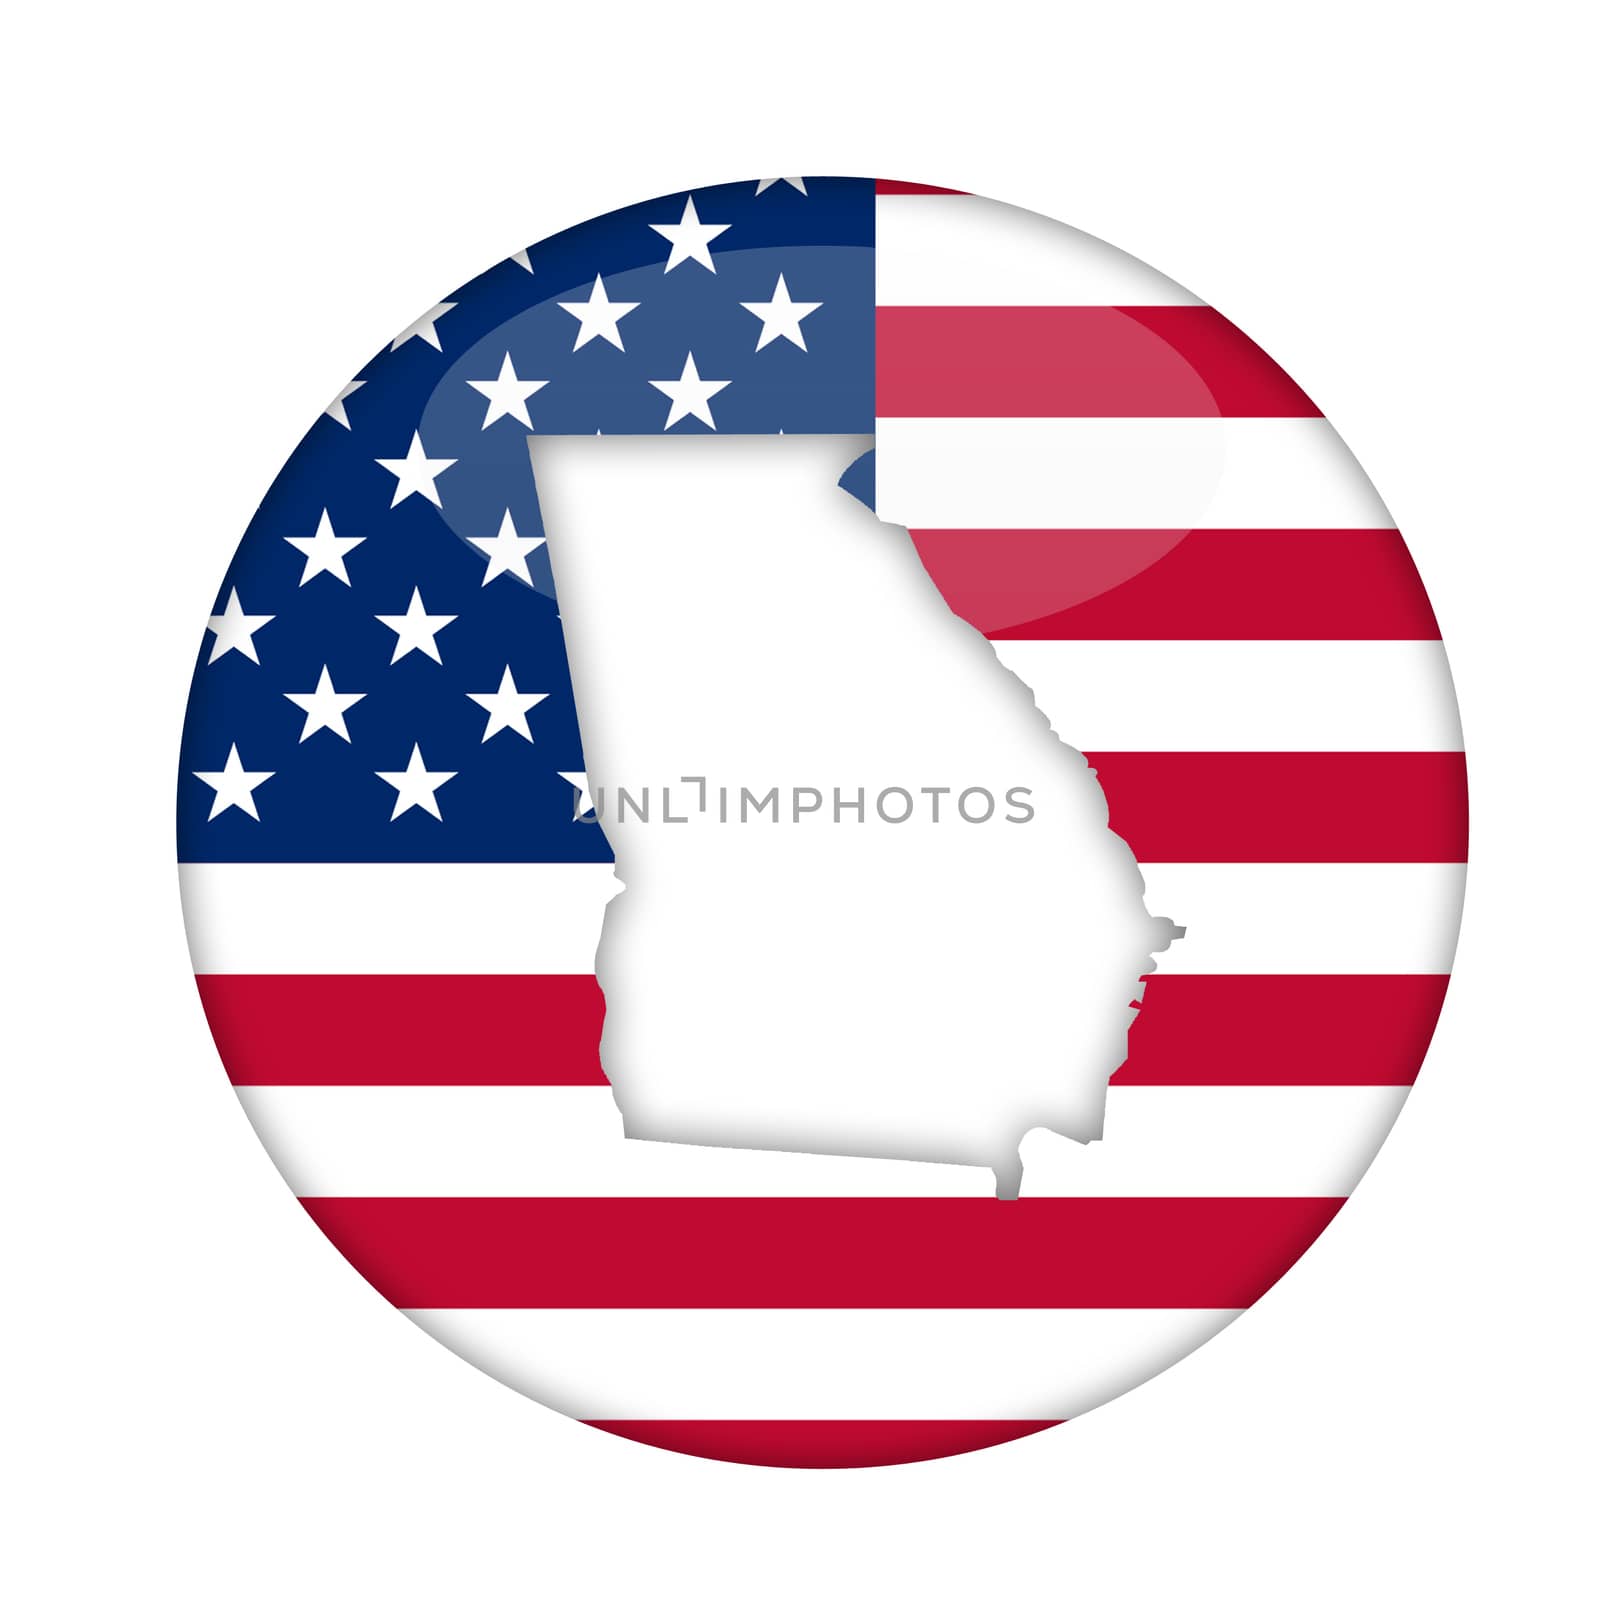 Georgia state of America badge isolated on a white background.